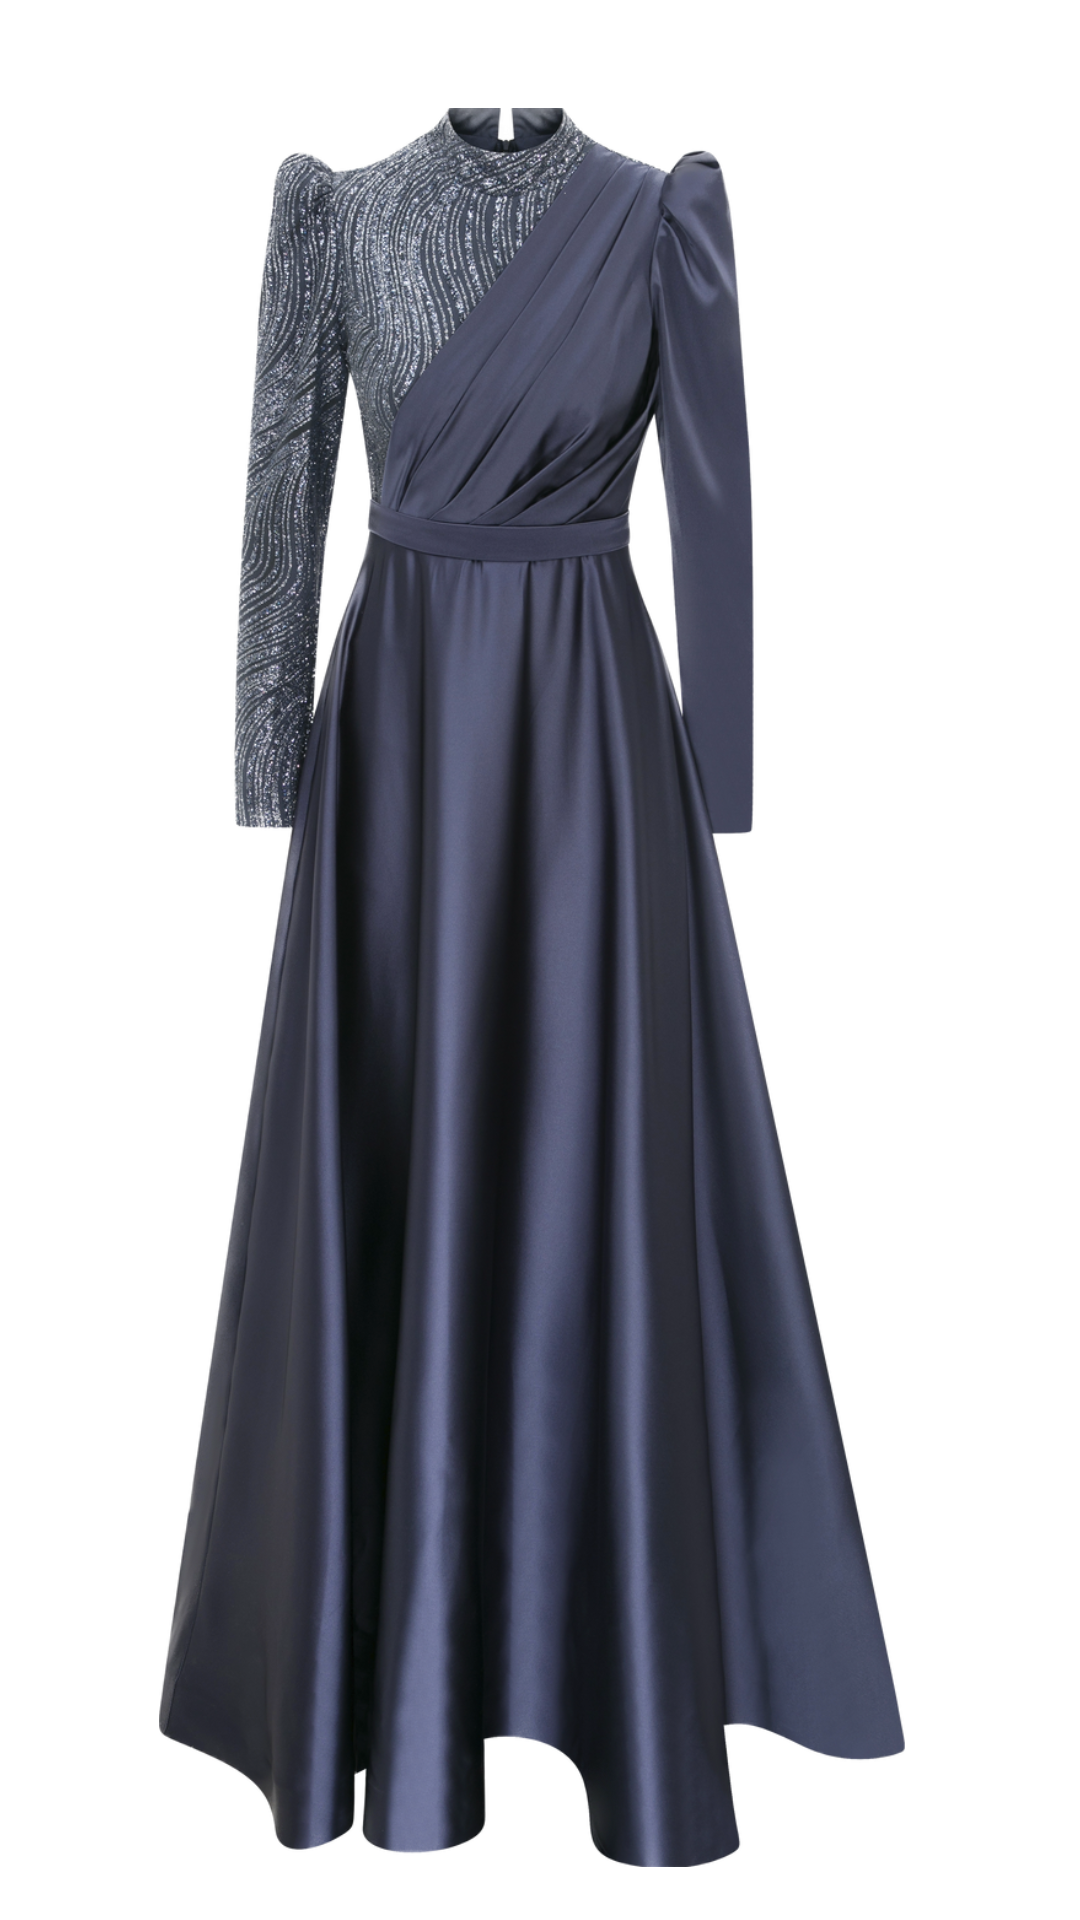 Satin Shimmer: Modest Rose Glitter Dress with Draped Upper Front and Fixed Belt